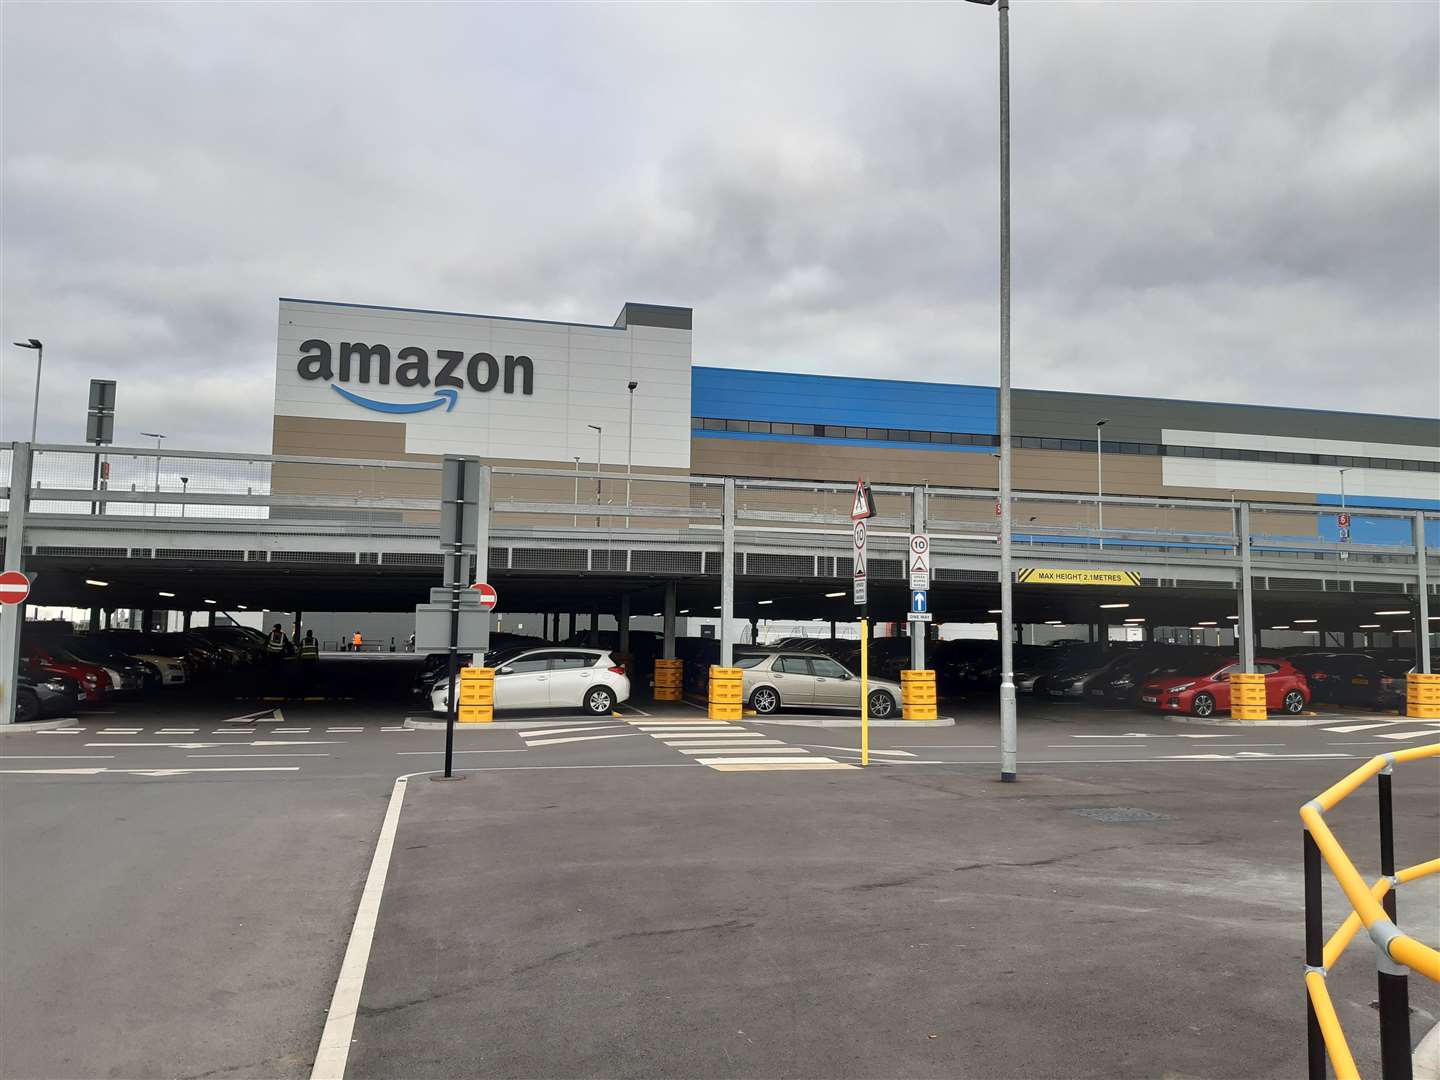 Employees at the Amazon depot in Dartford took part in "slowdown work" today as they seek a £2 per hour rise amid the cost of living crisis